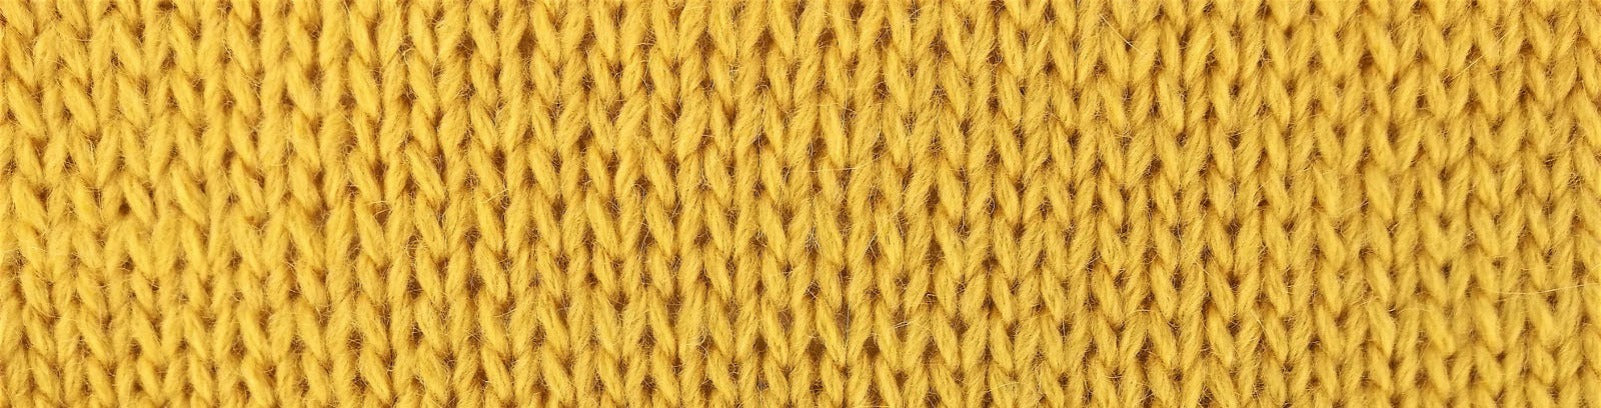 9 Ways to Keep Edges Tidy in Knitting and Crochet